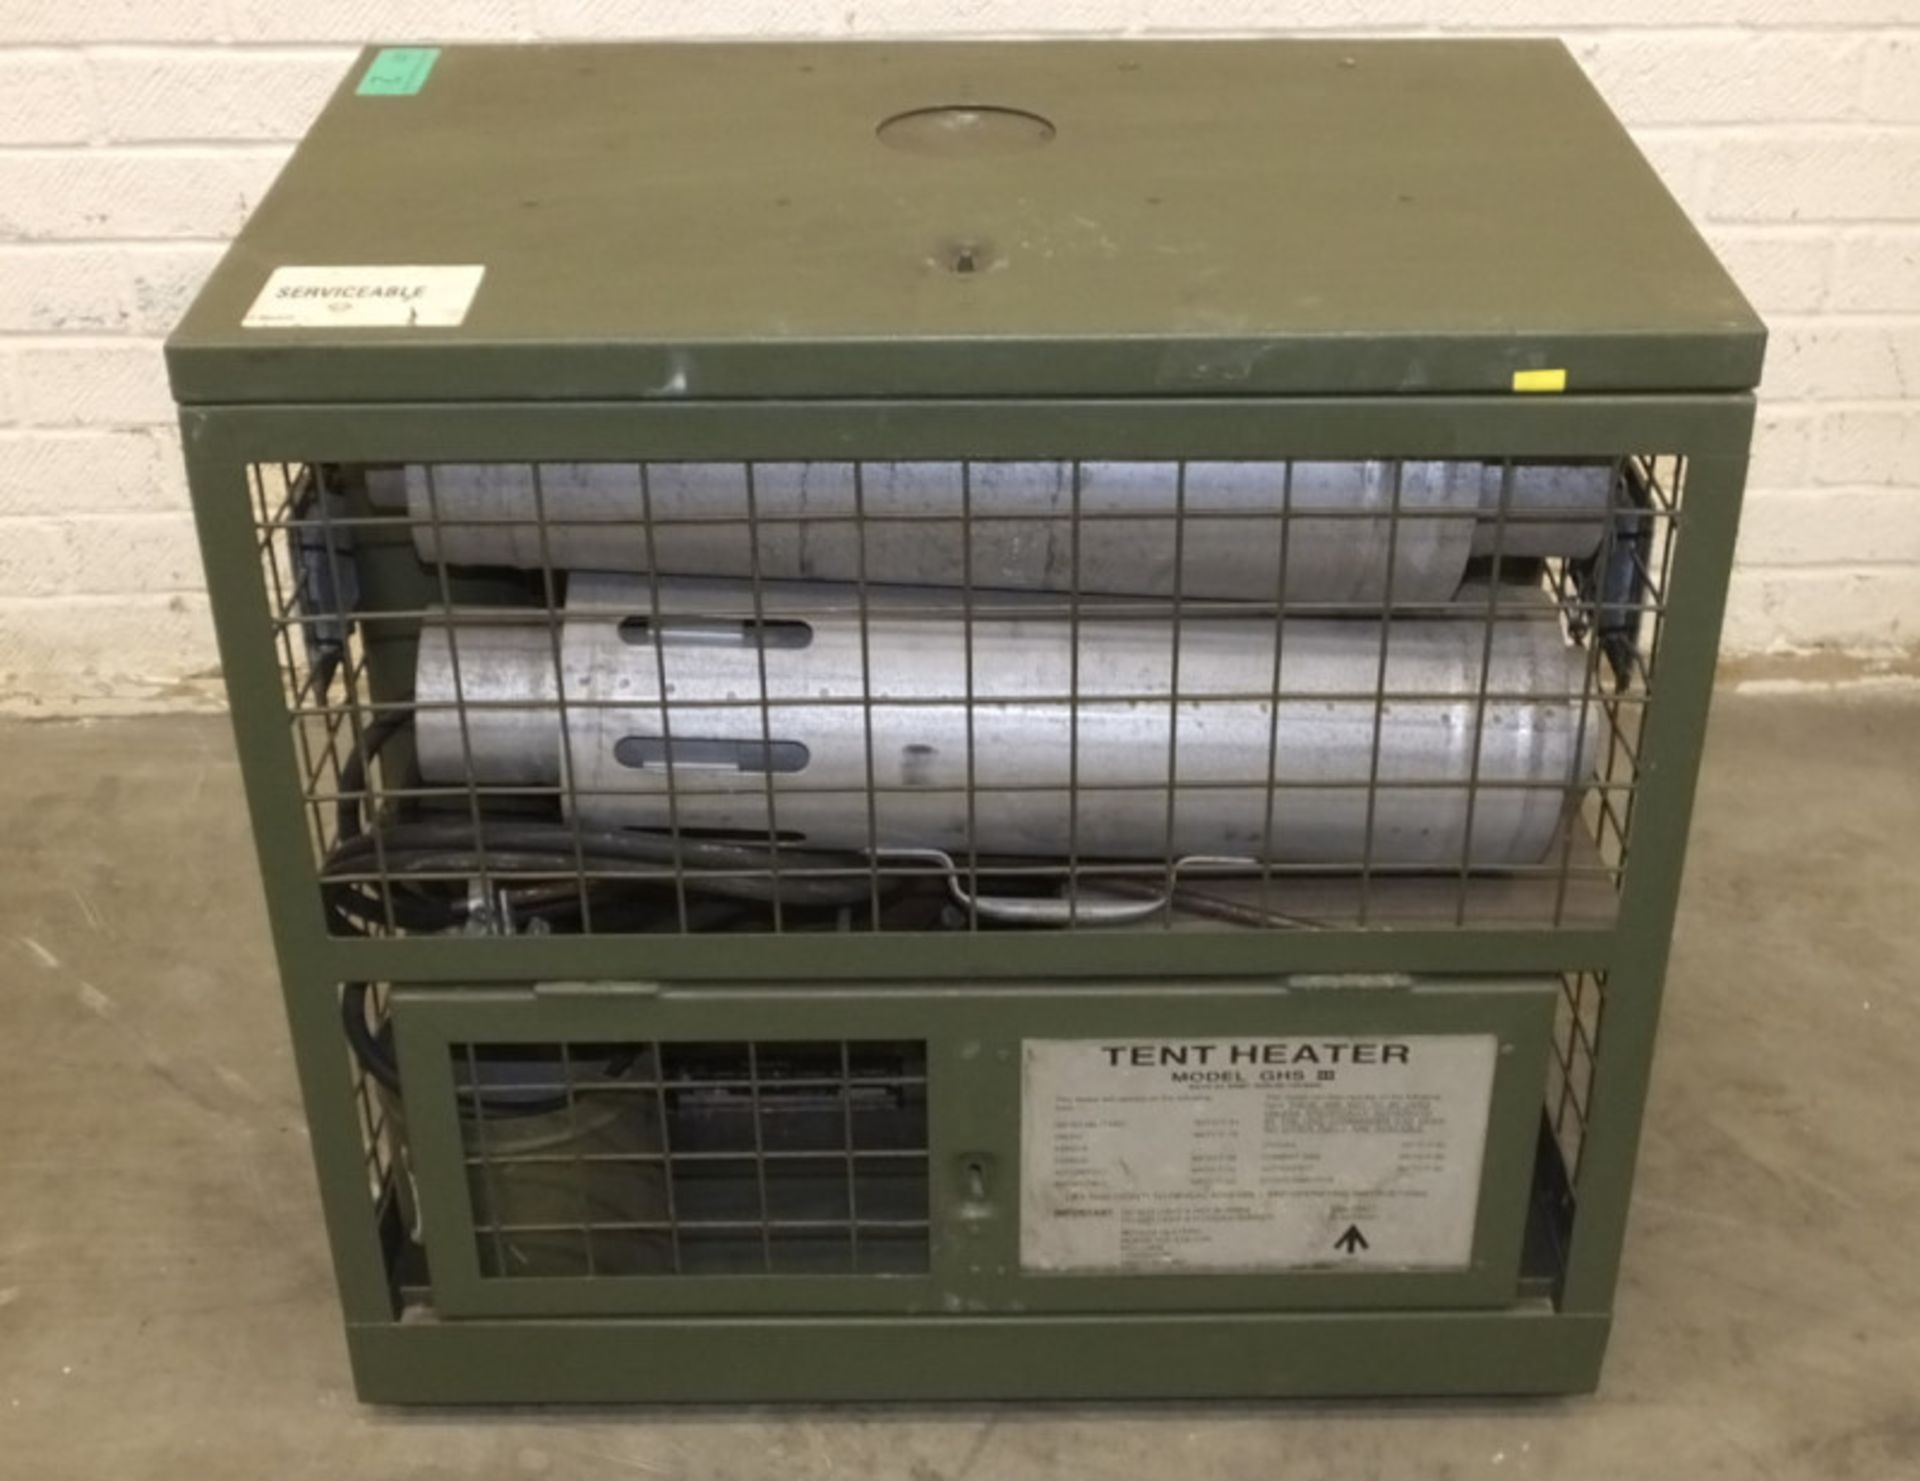 HotBox Heaters Tent Heater GHS III - NSN 4520-99-130-6045 Output - 5-15kW, Ex-MOD specific - Image 10 of 12